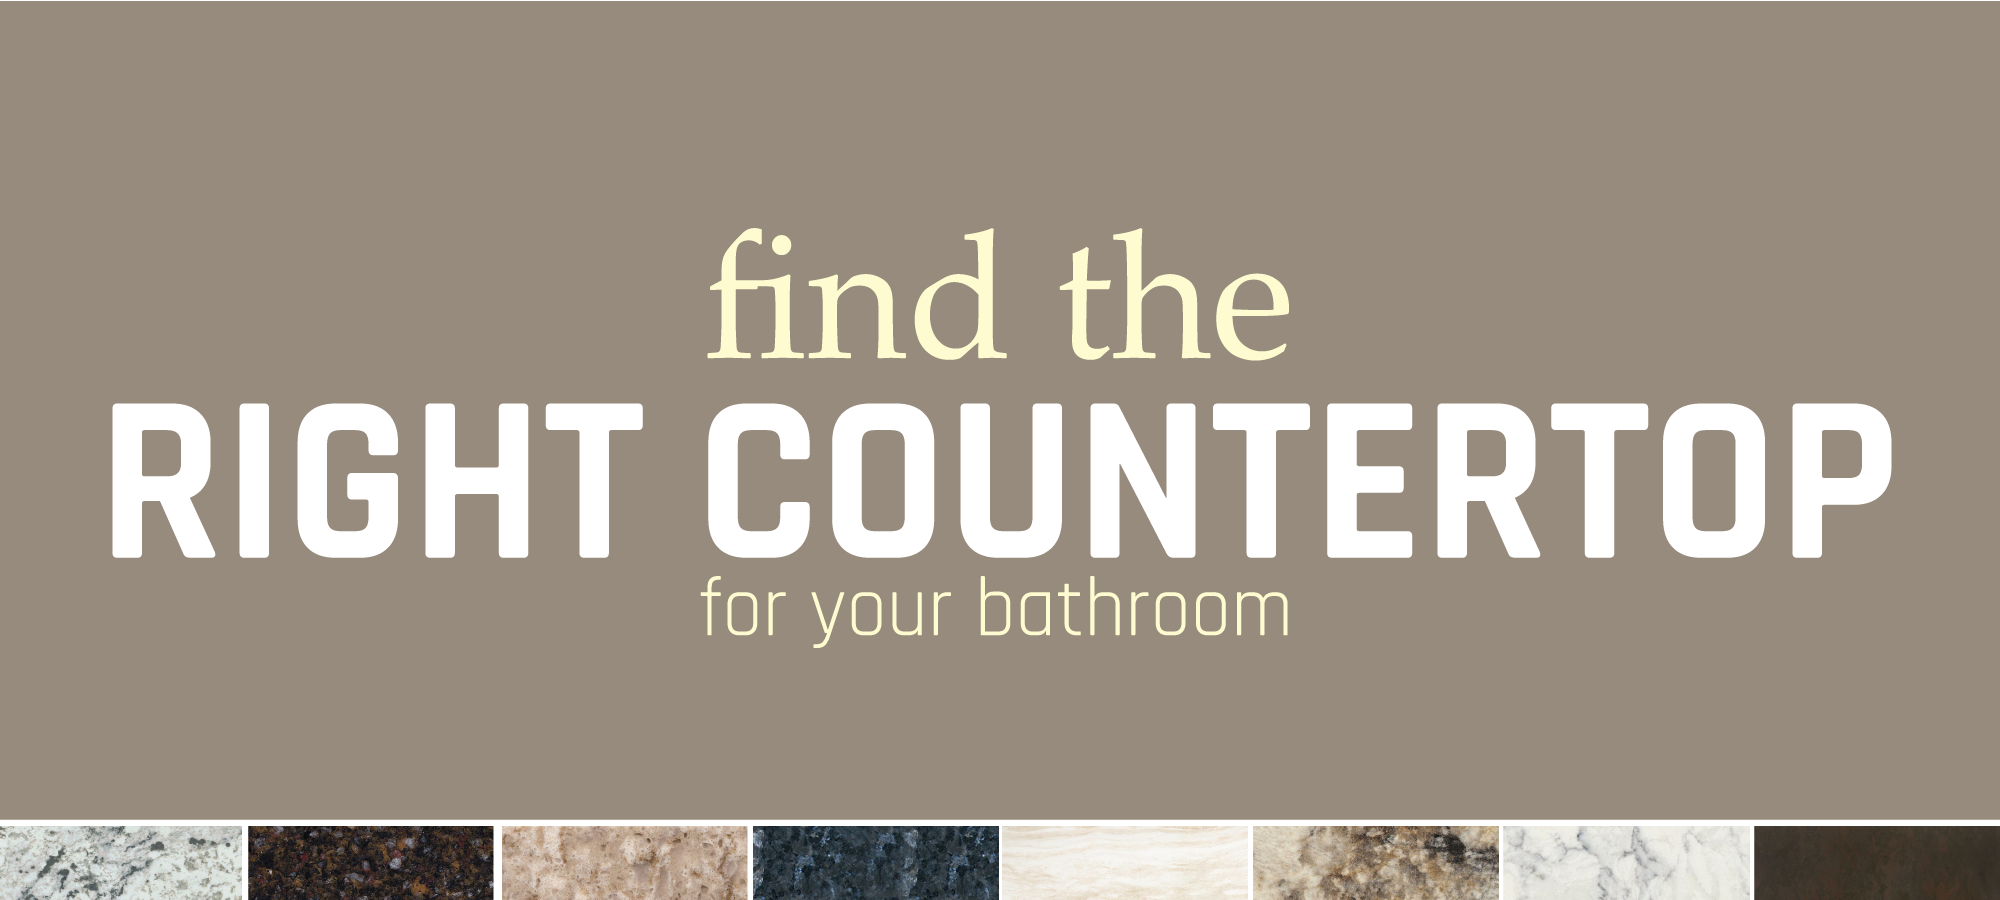 Personal Visigner-Find_the_Right_Bathroom_Countertop